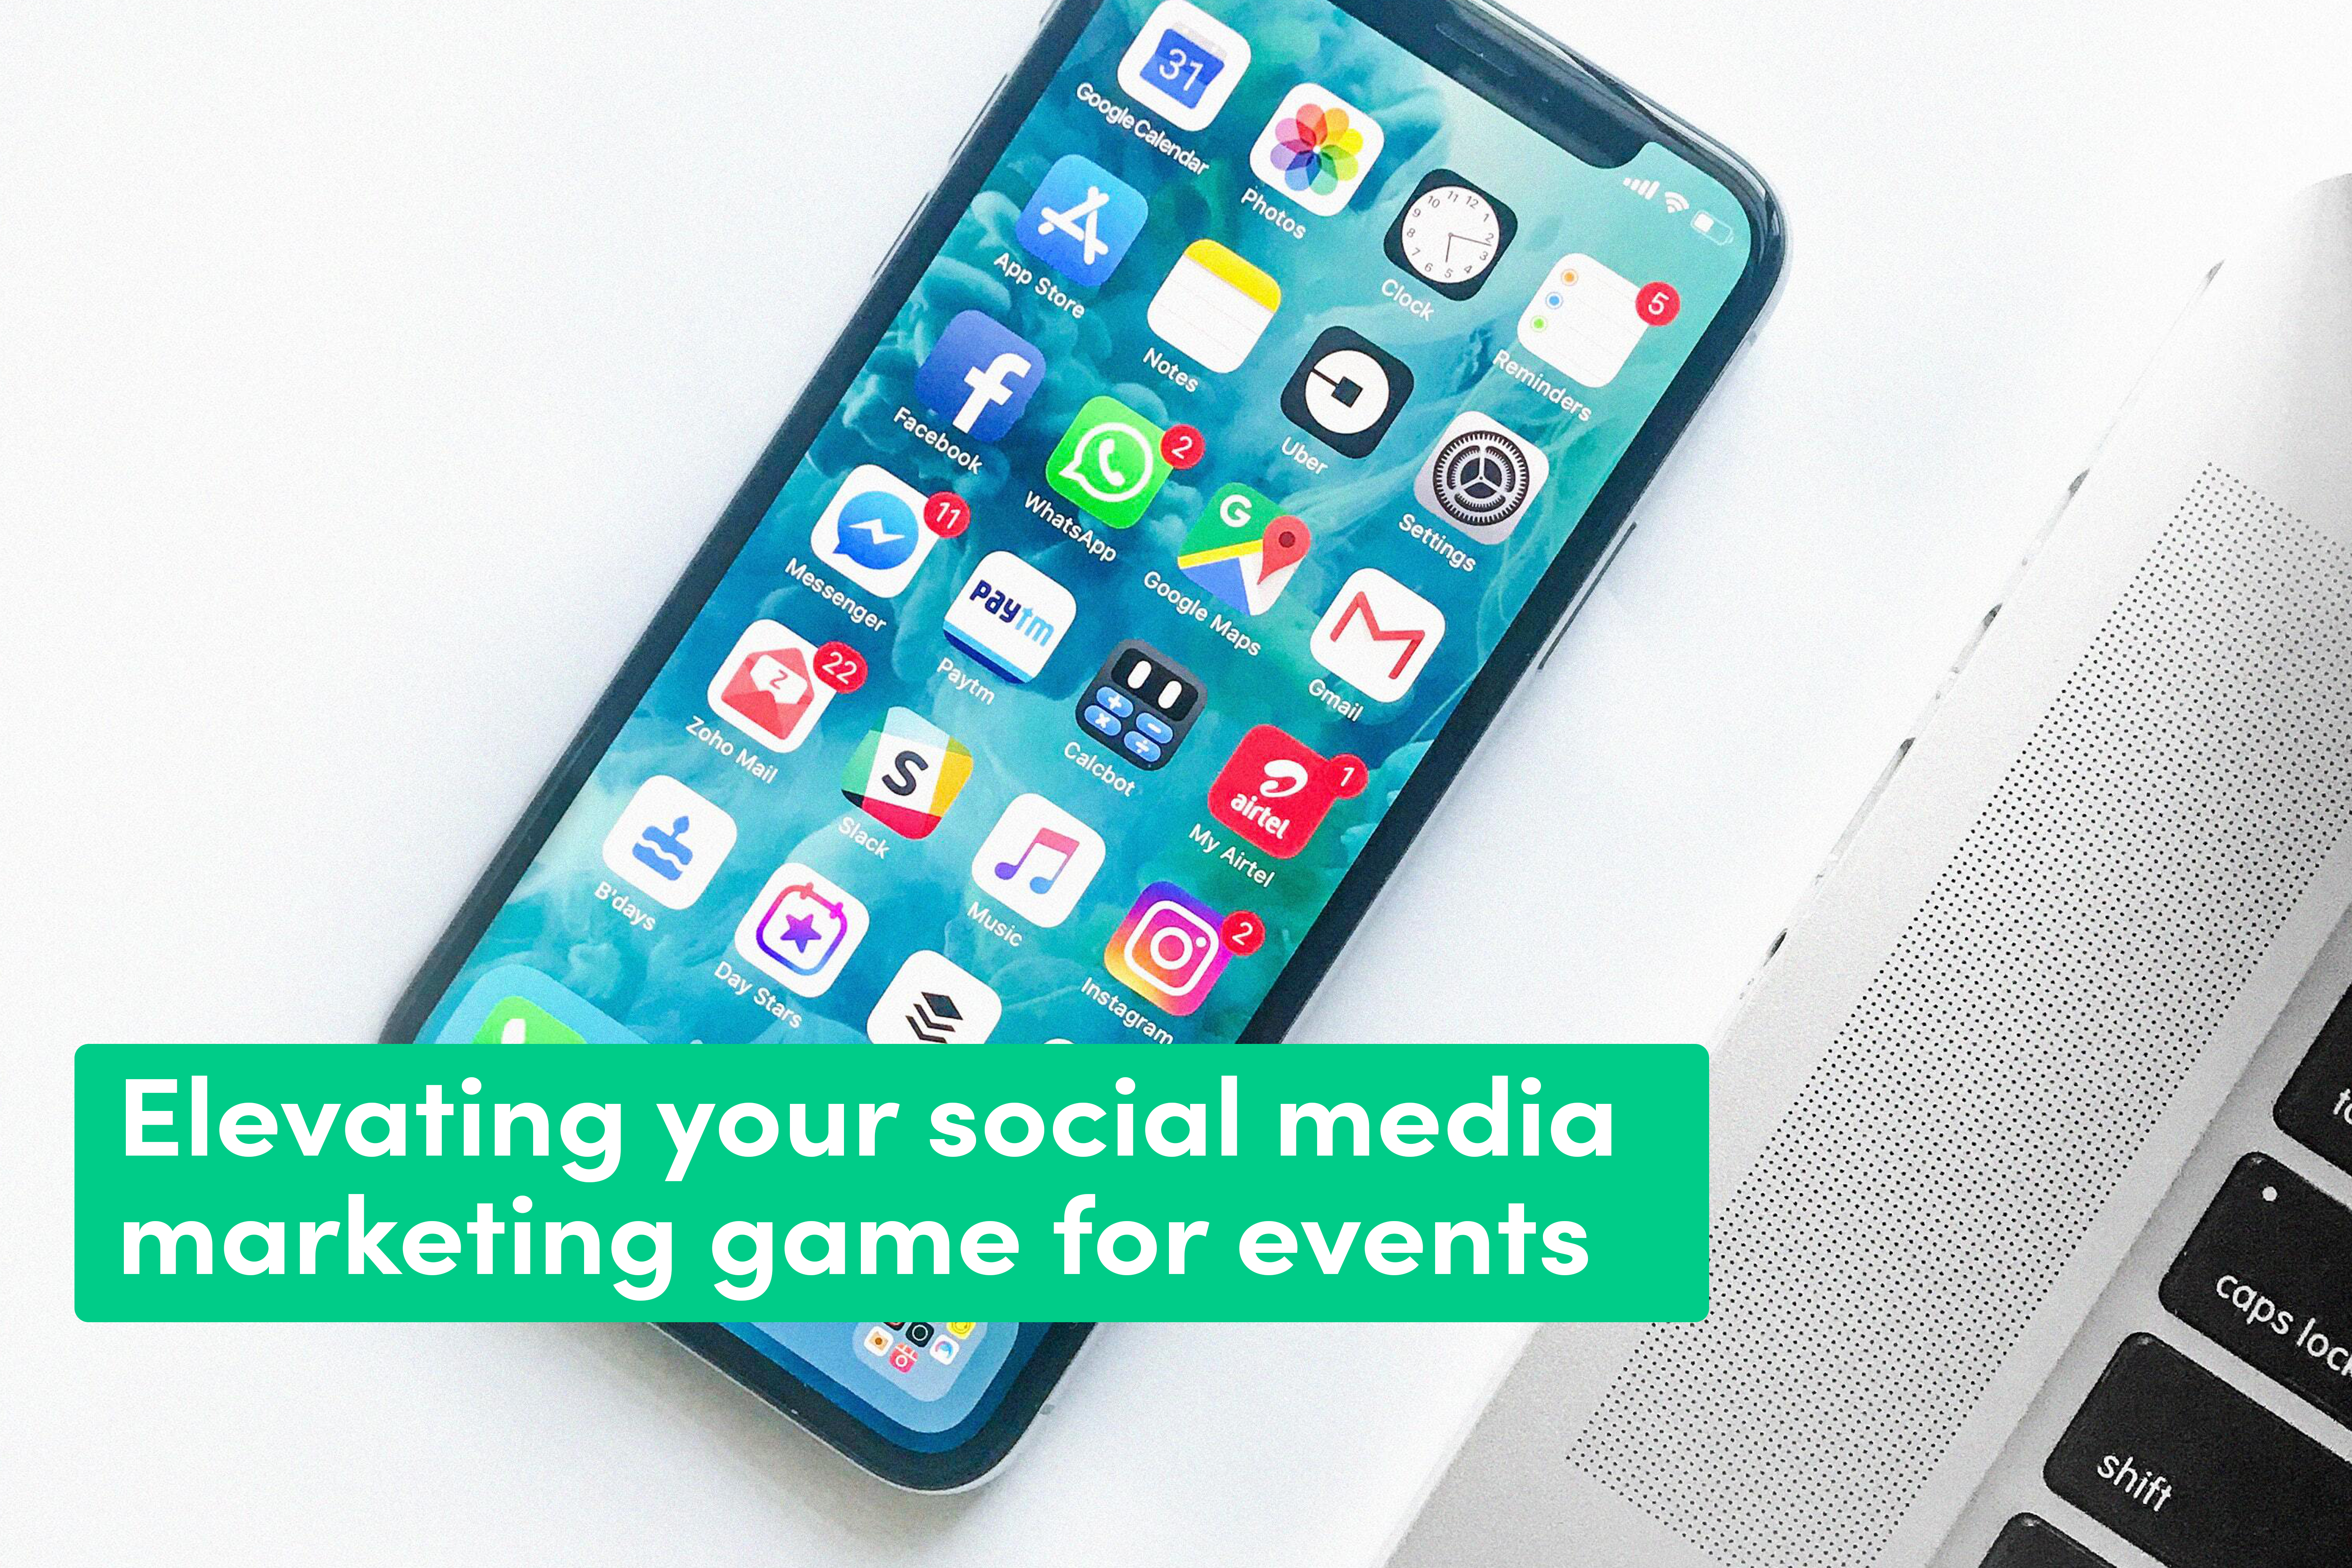 Elevating your social media marketing game for events